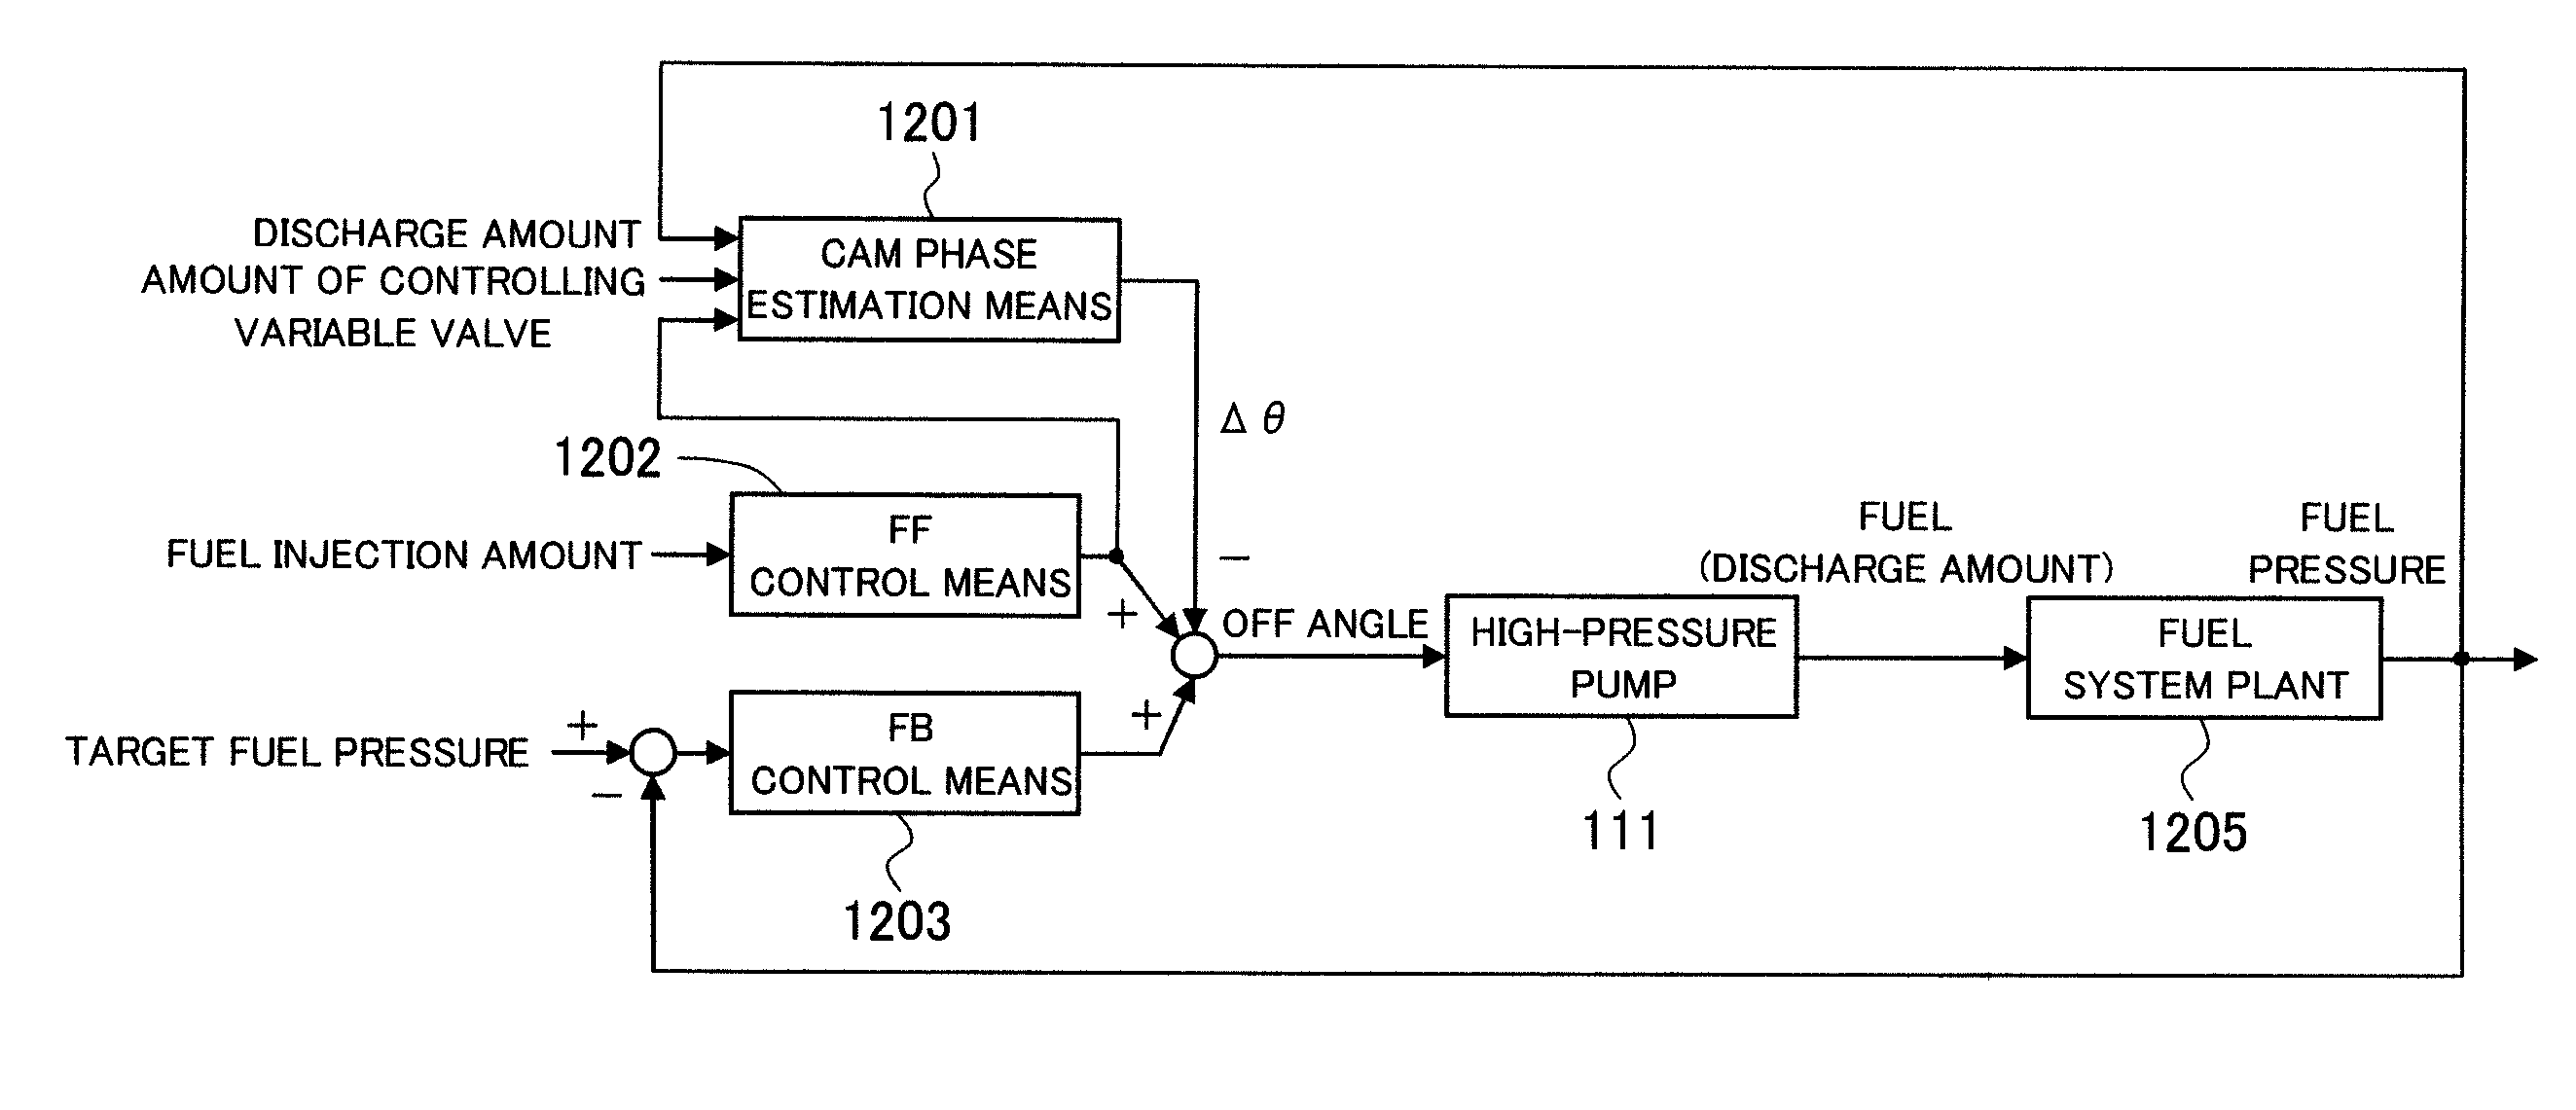 Control apparatus for cylinder injection internal combustion engine with high-pressure fuel pump